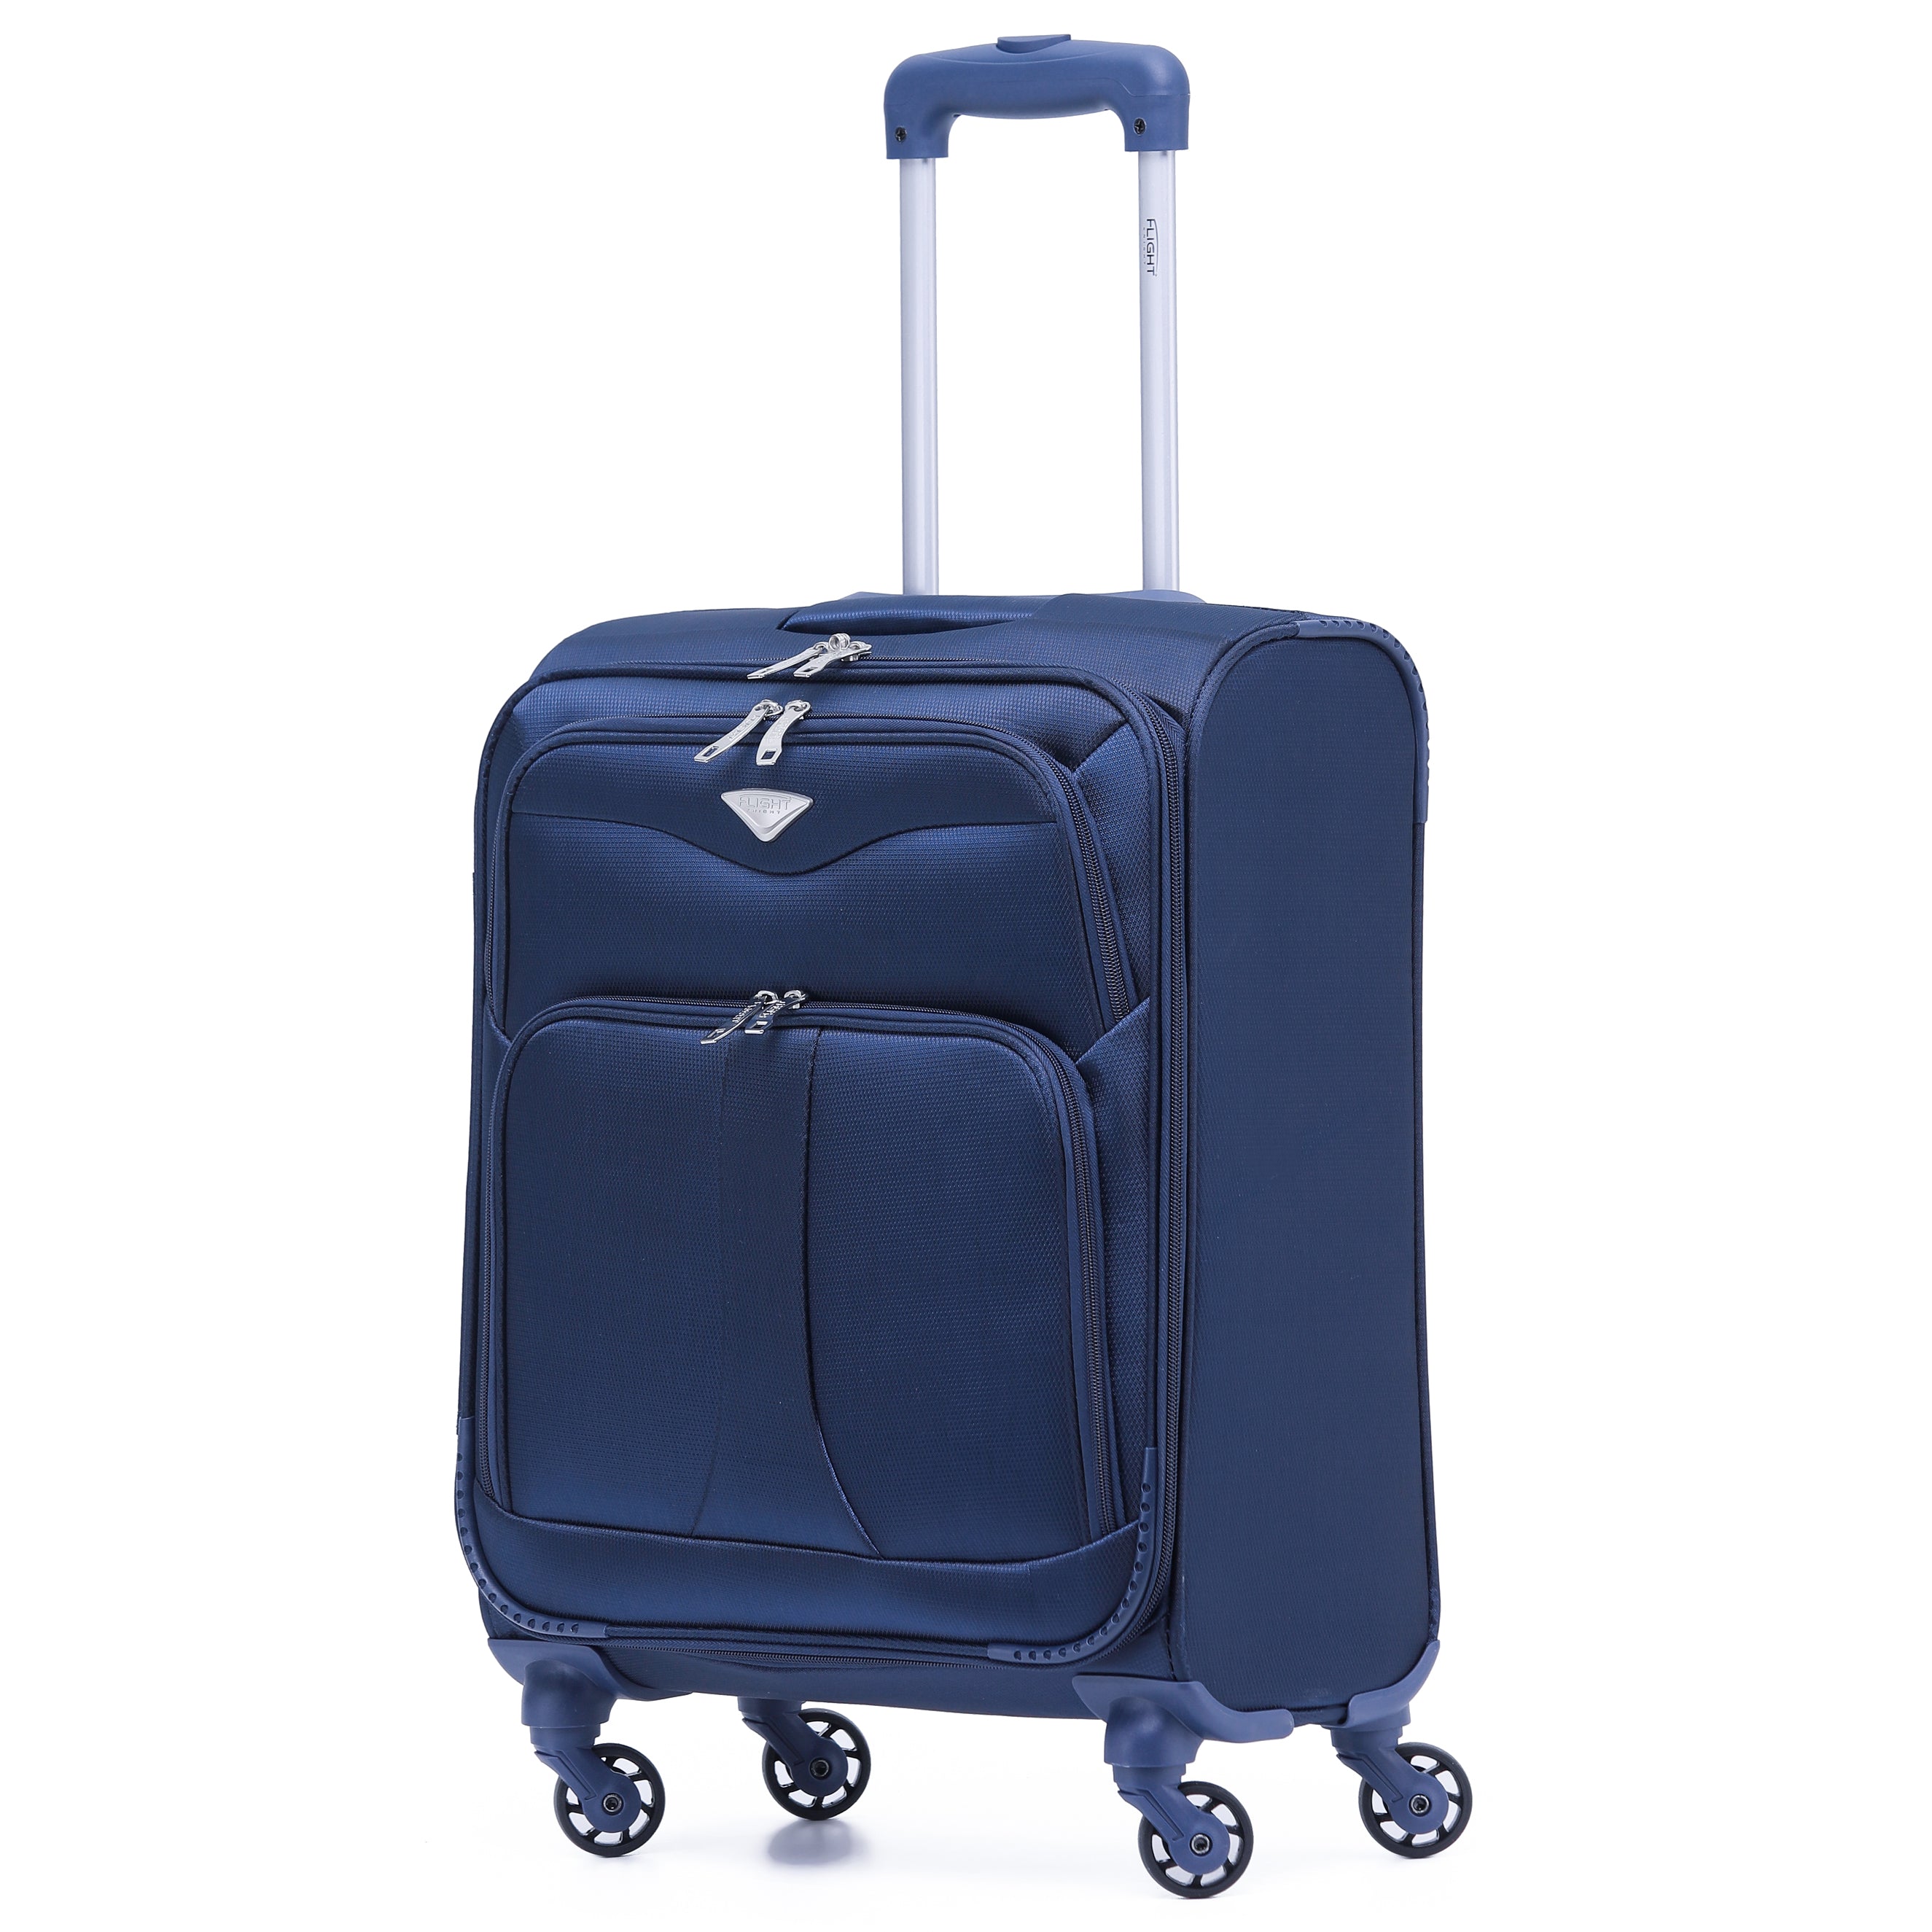 55x40x20cm 4 Wheel 800D Soft Case Suitcase Cabin Carry On Hand Luggage Ryanir Maximium Priority Carry On Approved